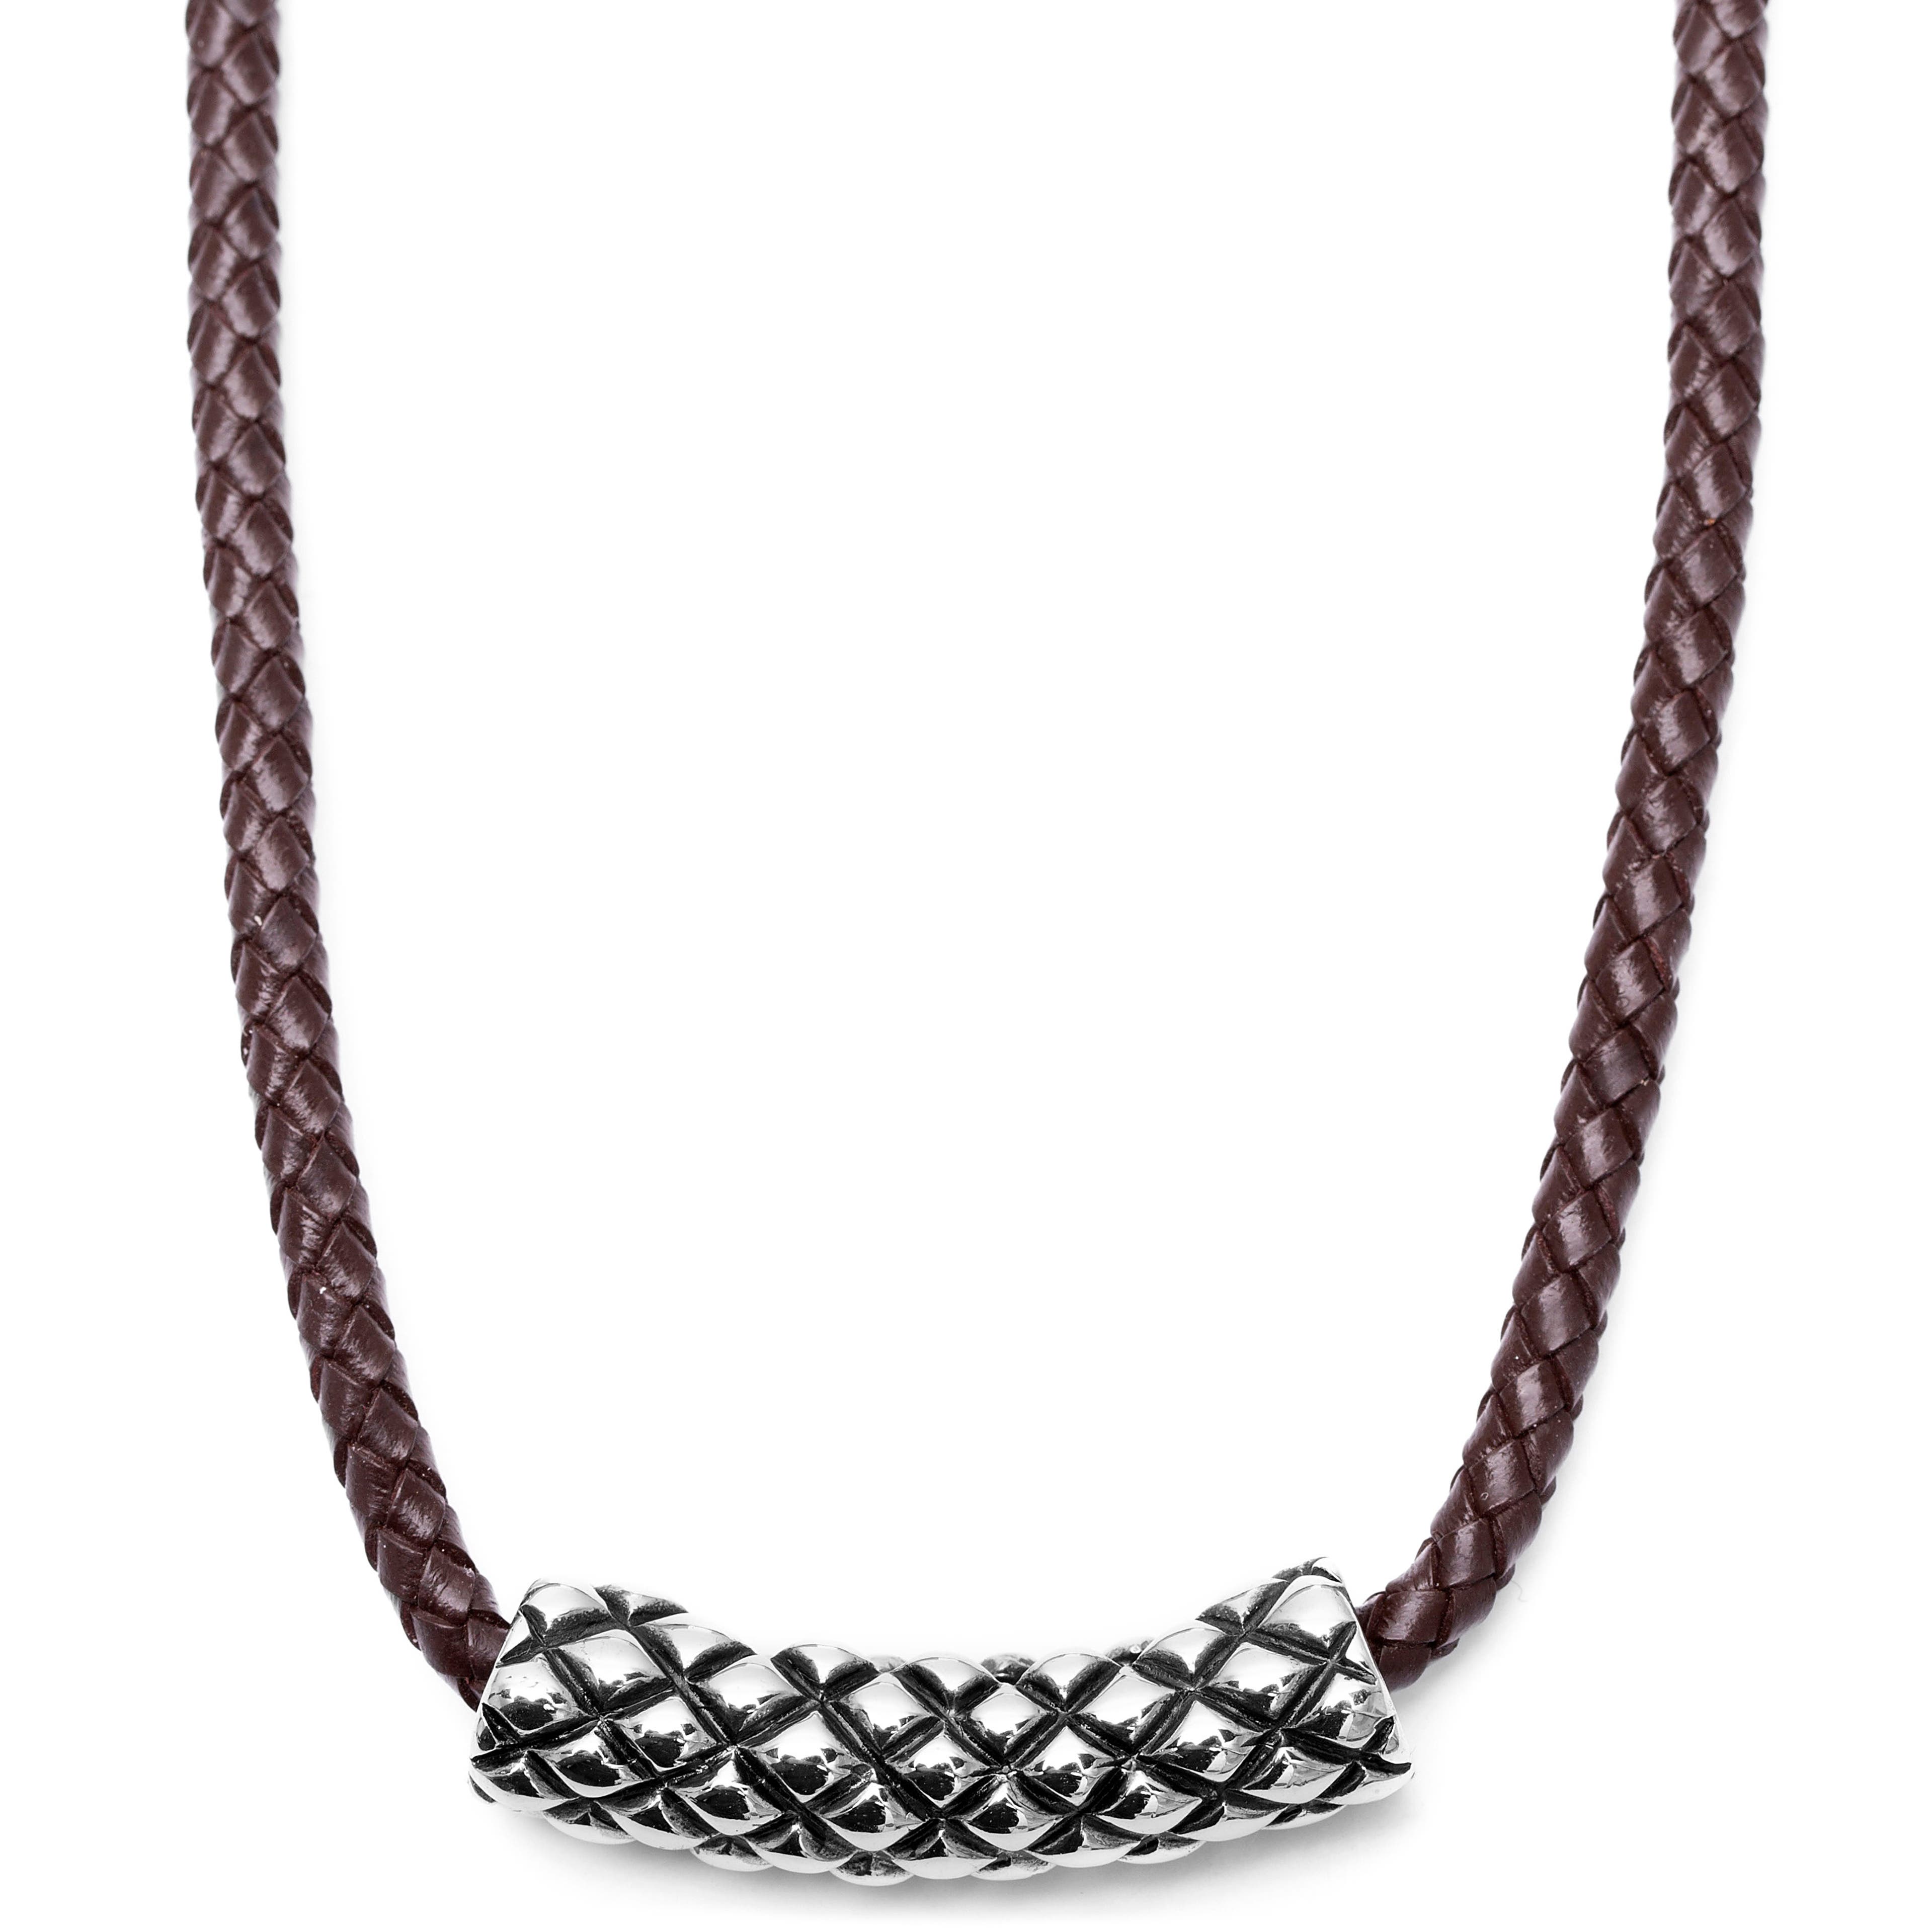 Brown Leather With Silver-Tone Stainless Steel Criss Cross Necklace